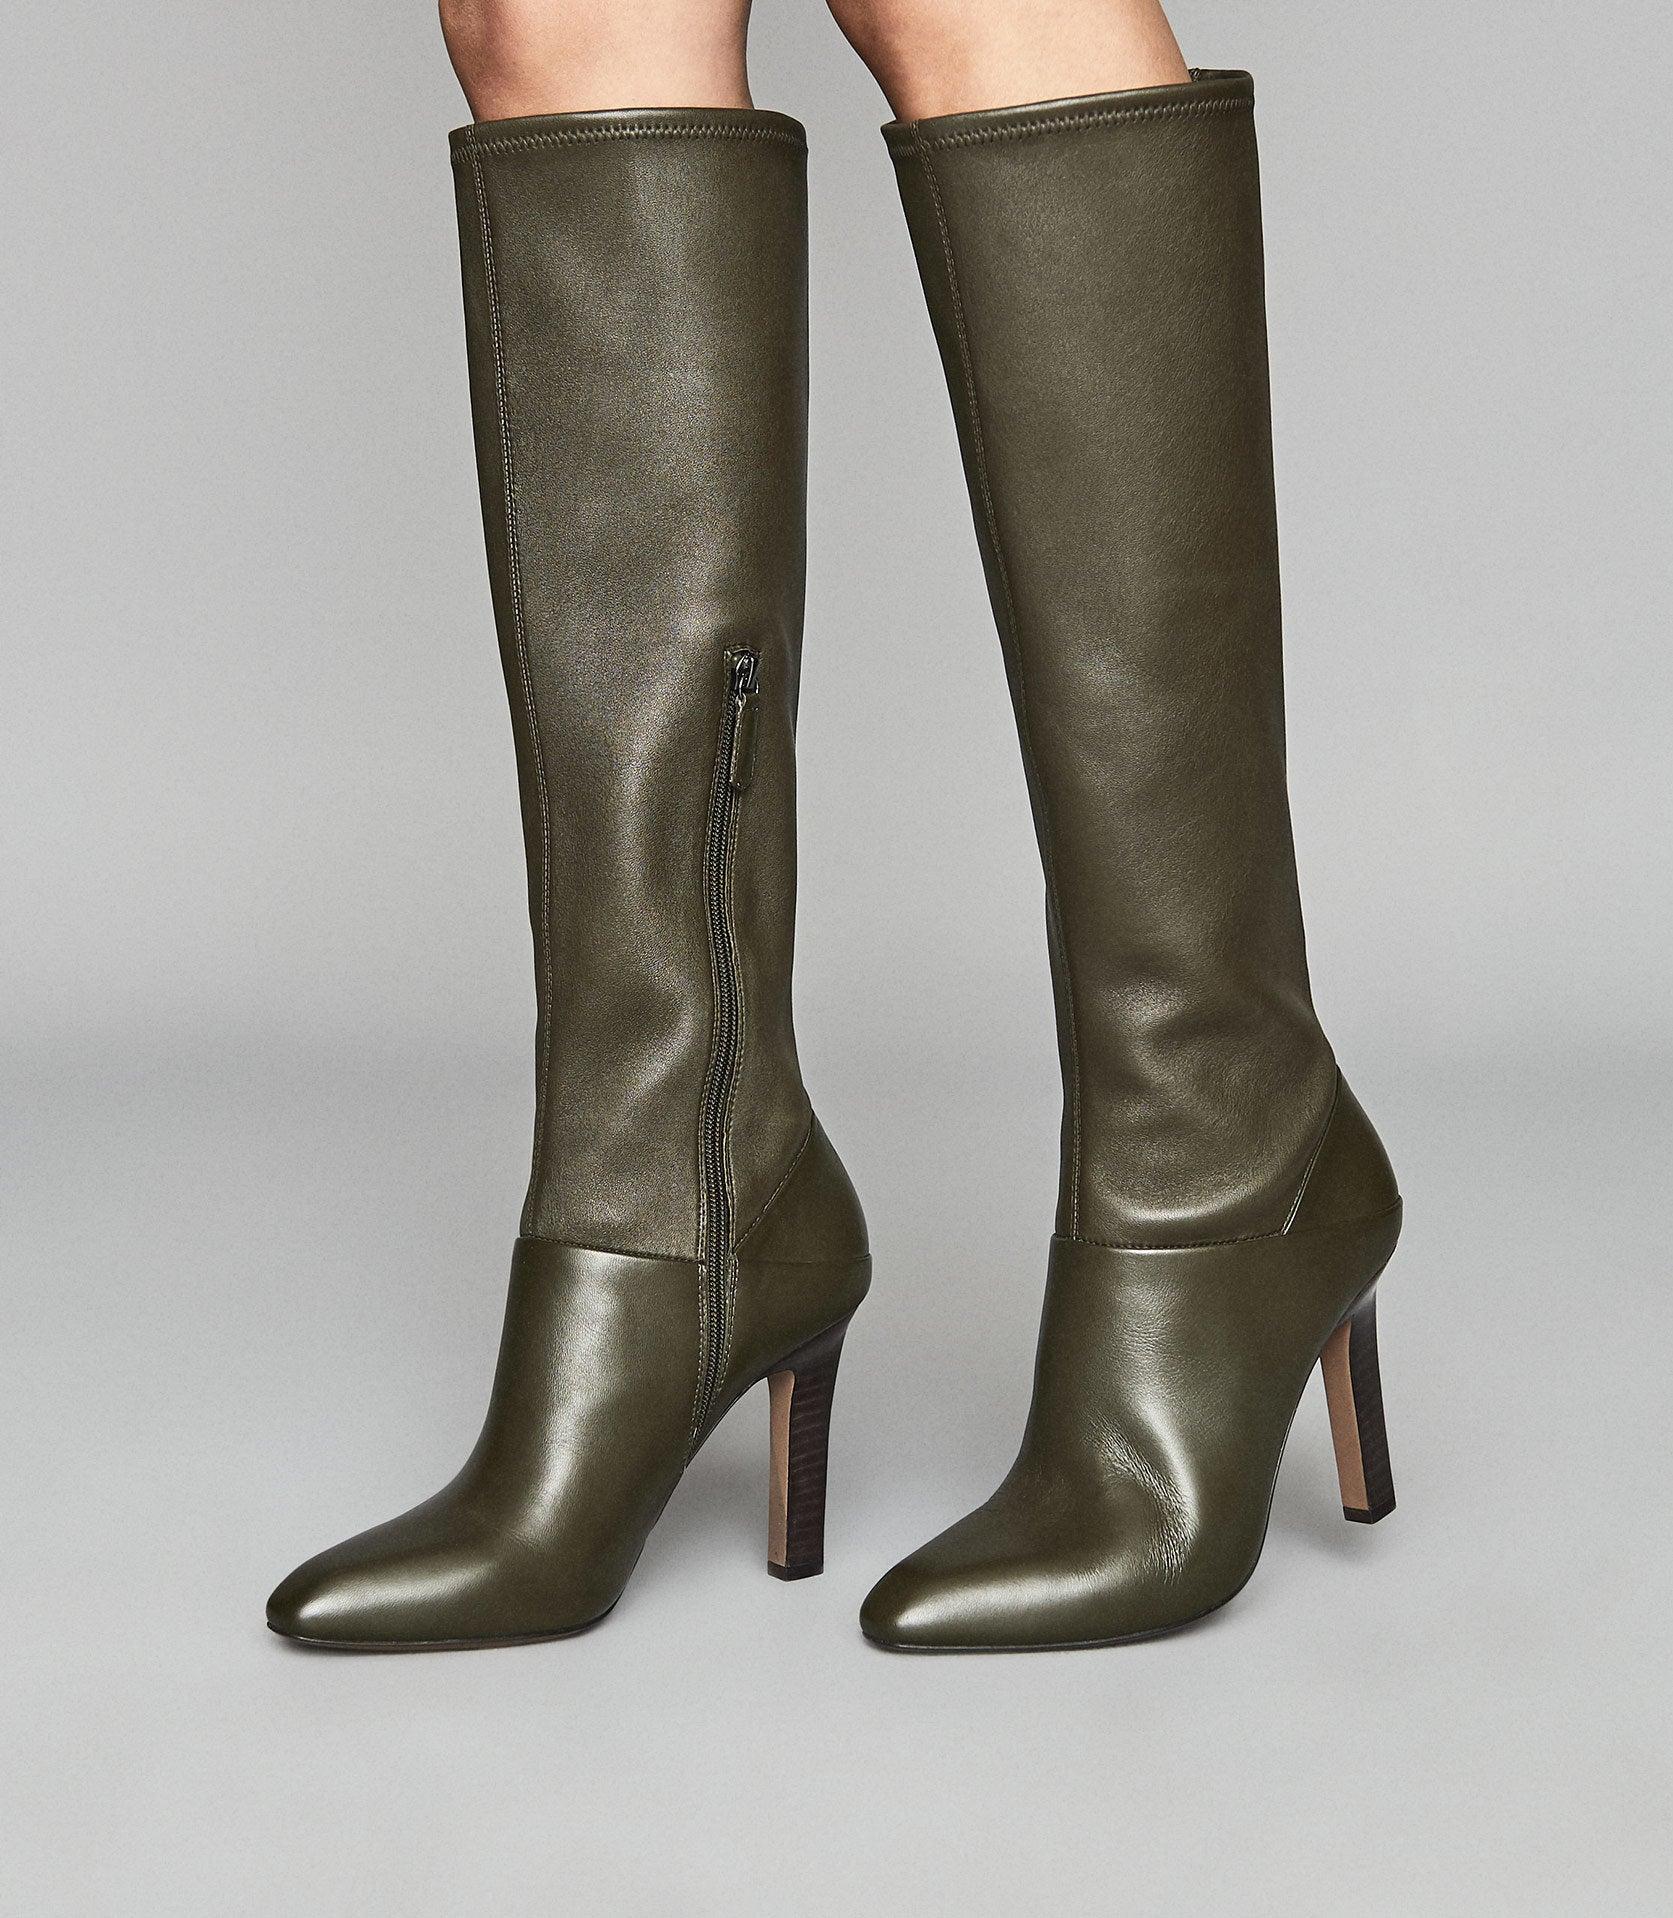 Reiss Leather Knee High Boots in Military Green (Green) - Lyst